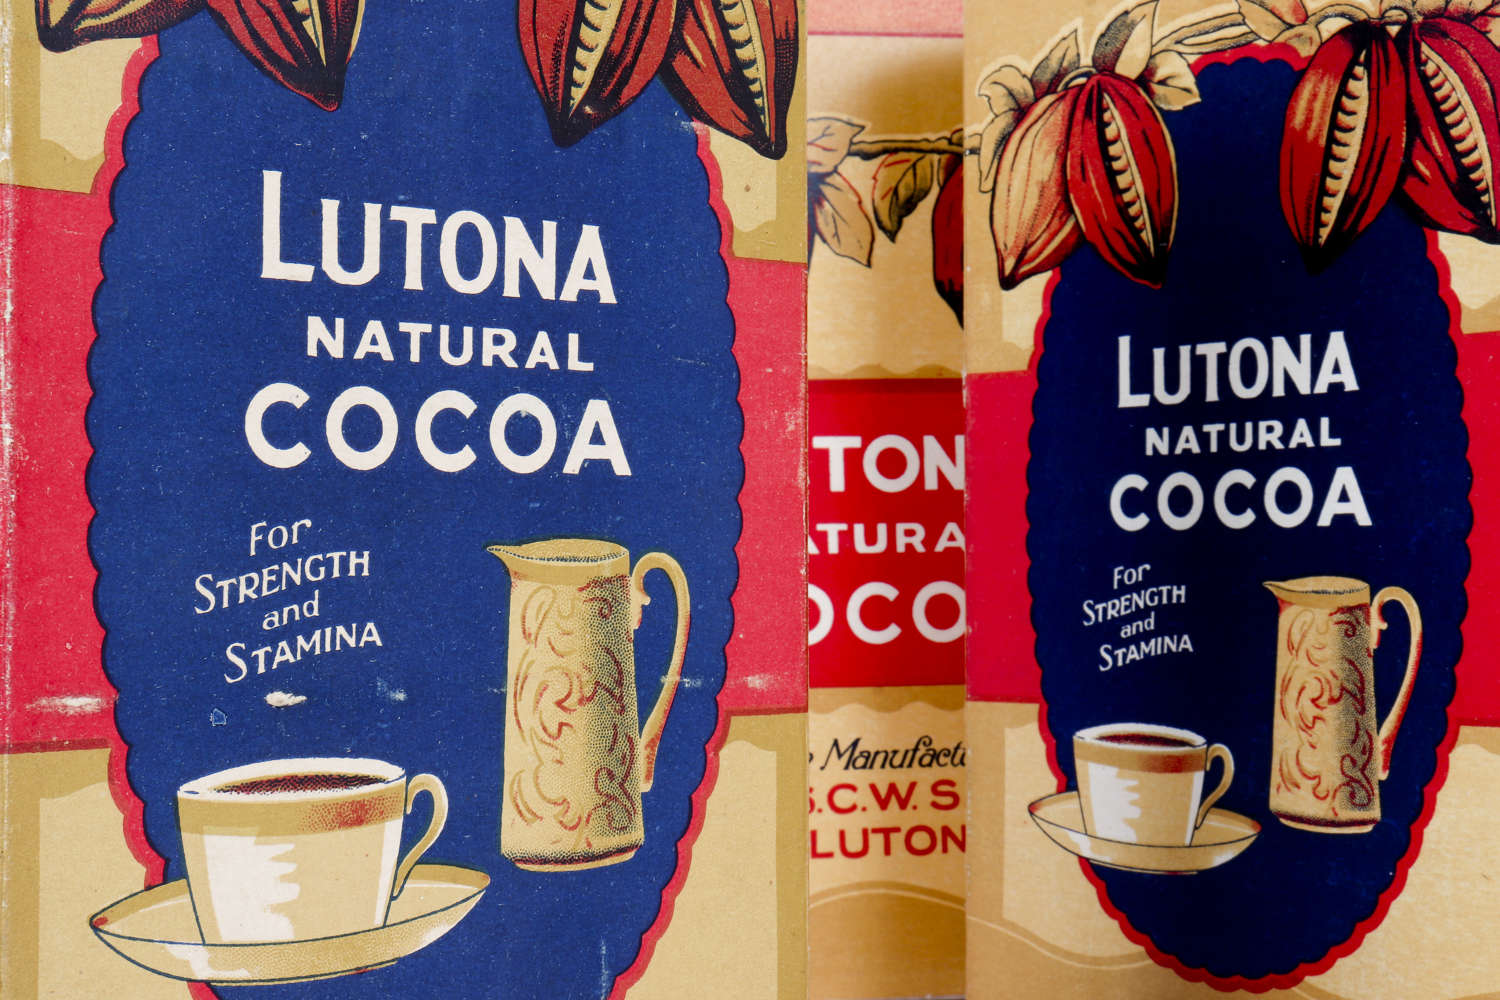 Lutona natural cocoa 'dummy packaging'